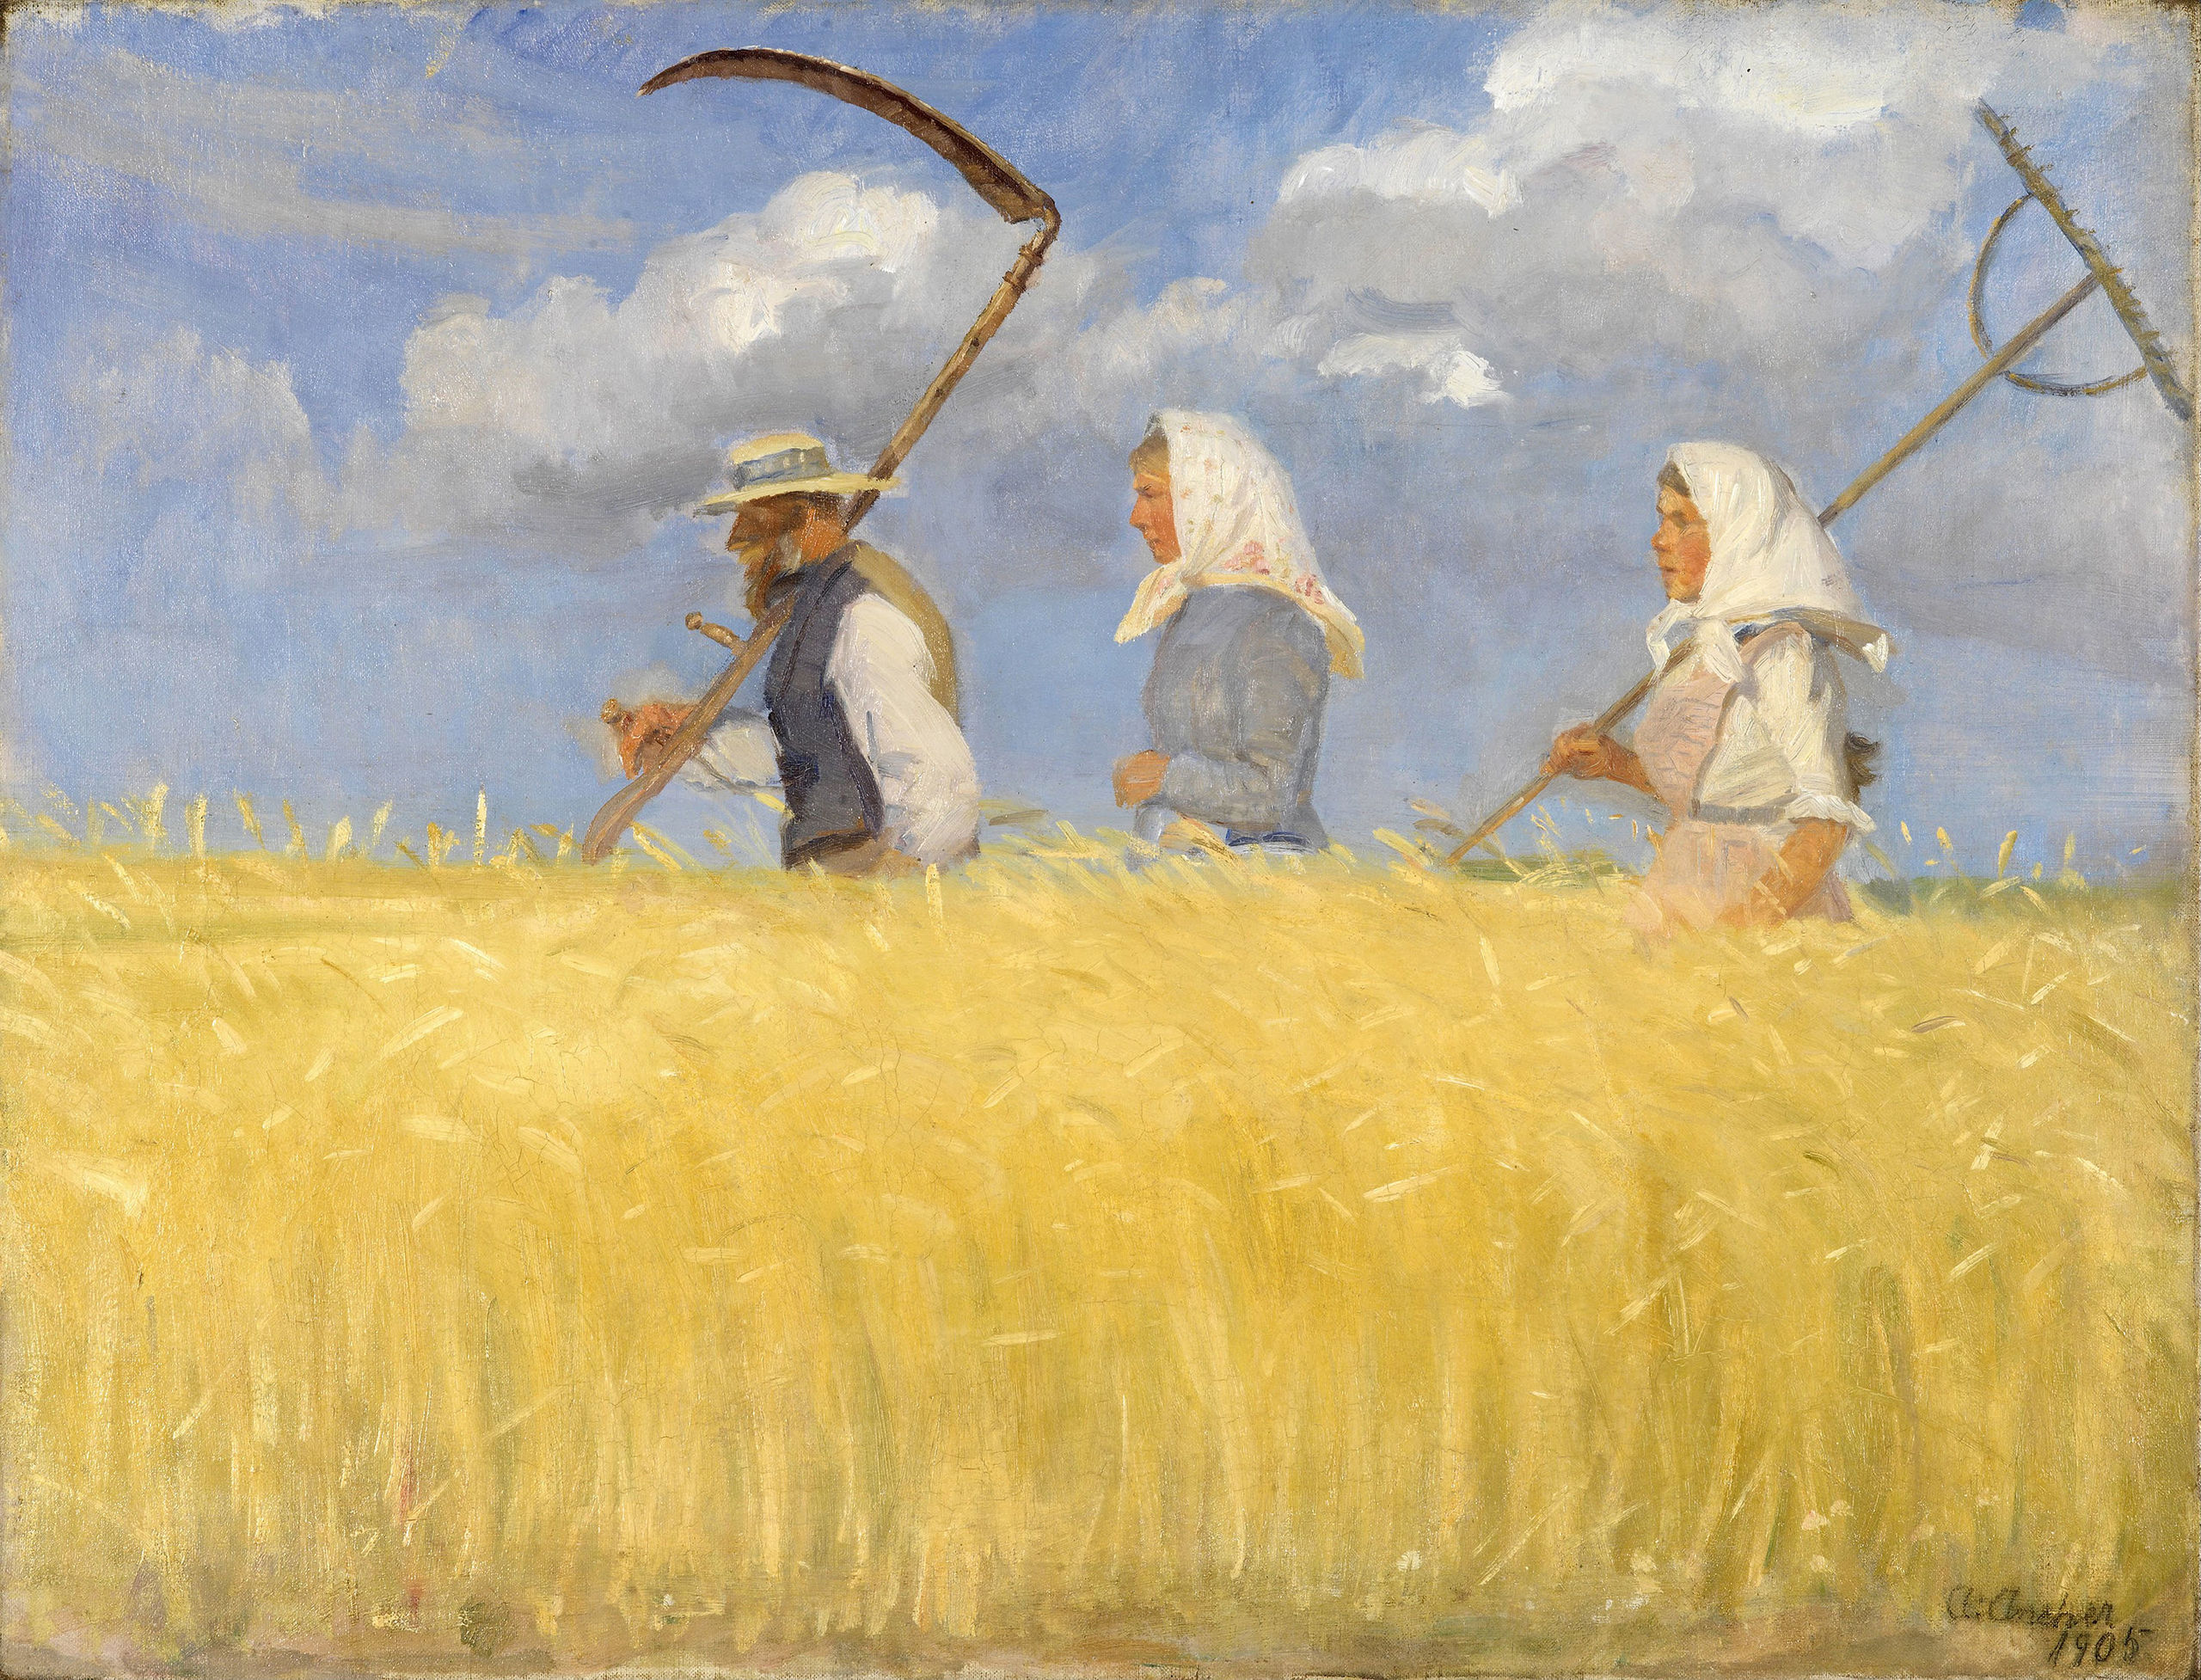 Inspiration: “Harvesters,” by Anna Ancher